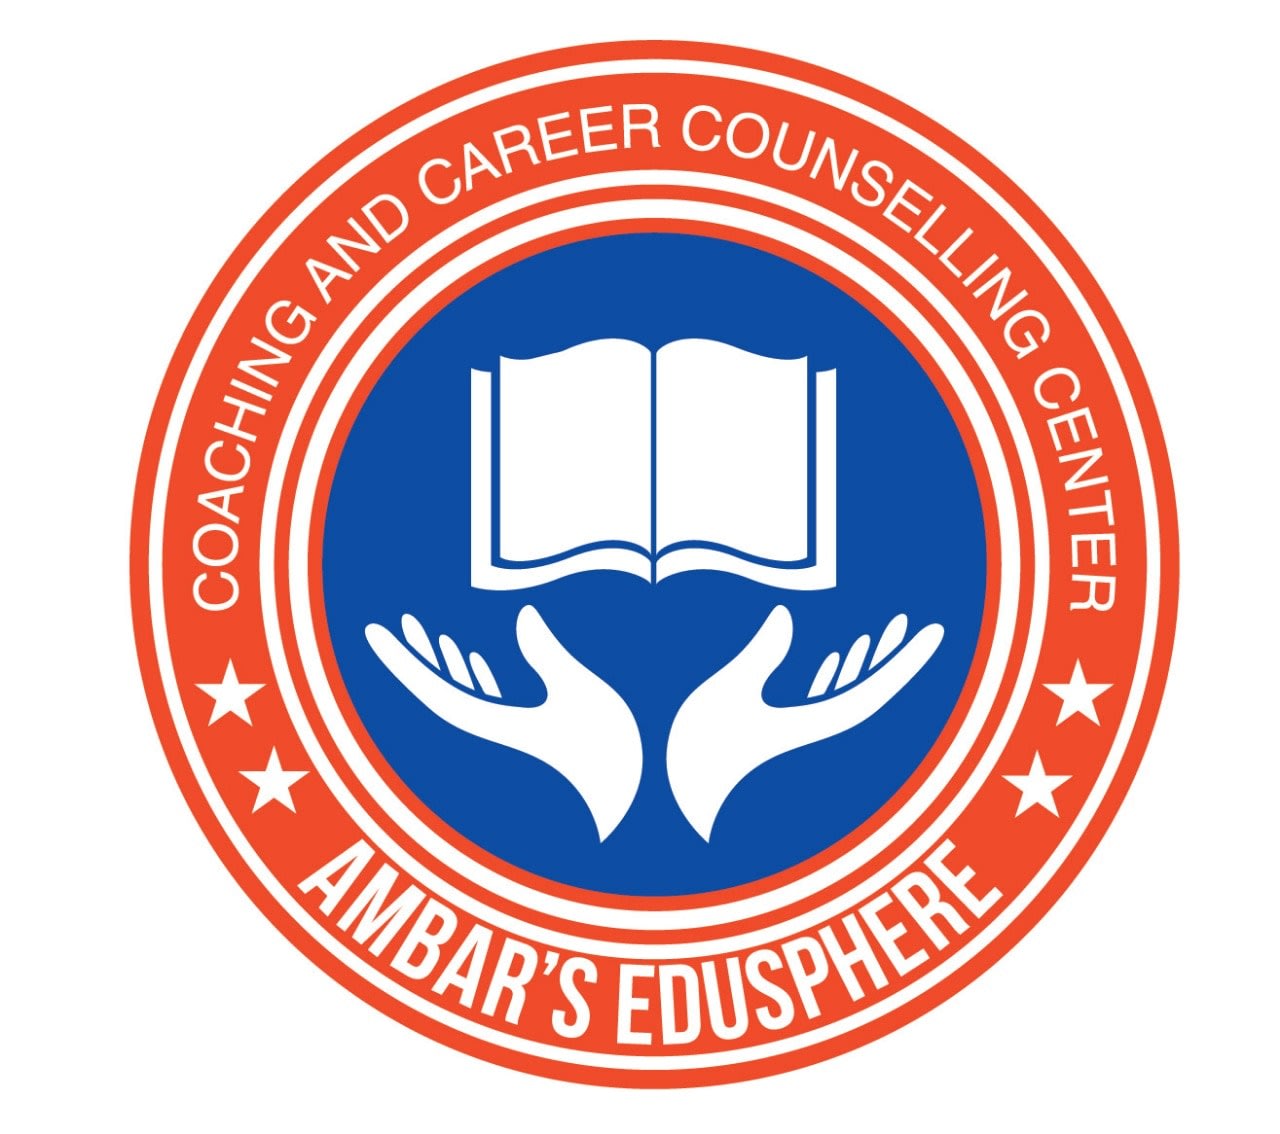 Ambar's Edusphere Coaching And Career Counselling Center